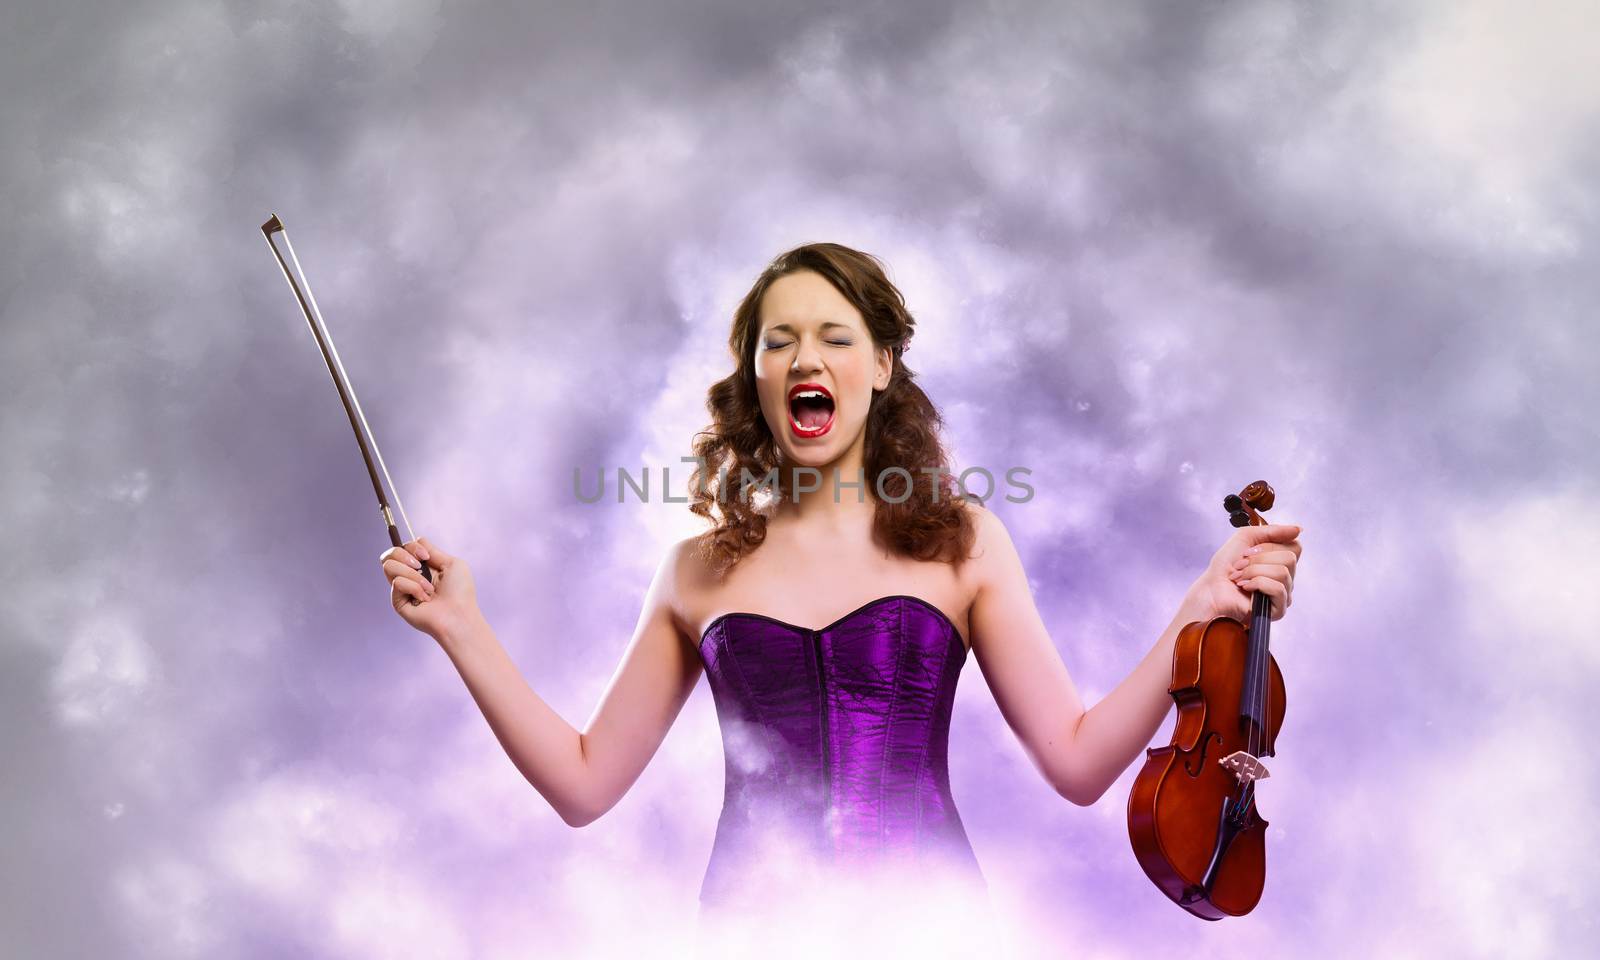 Image of young singing woman holding violin